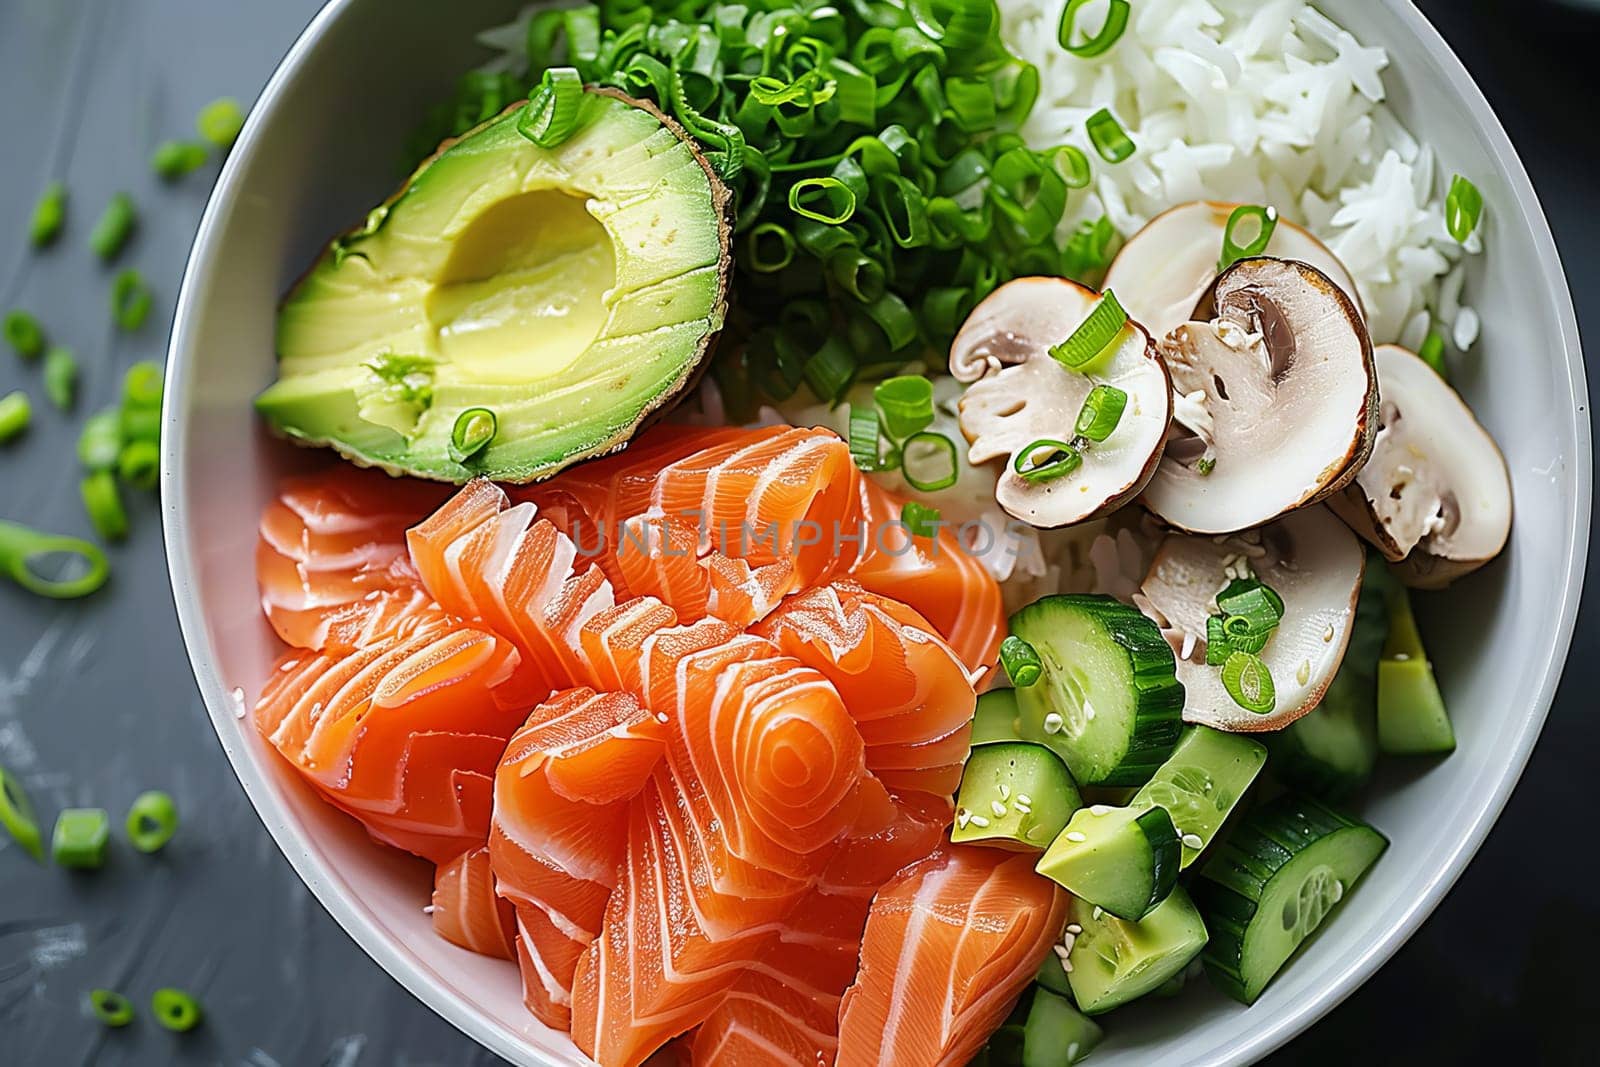 Bowl with salmon, avocado and other ingredients. Healthy food concept.